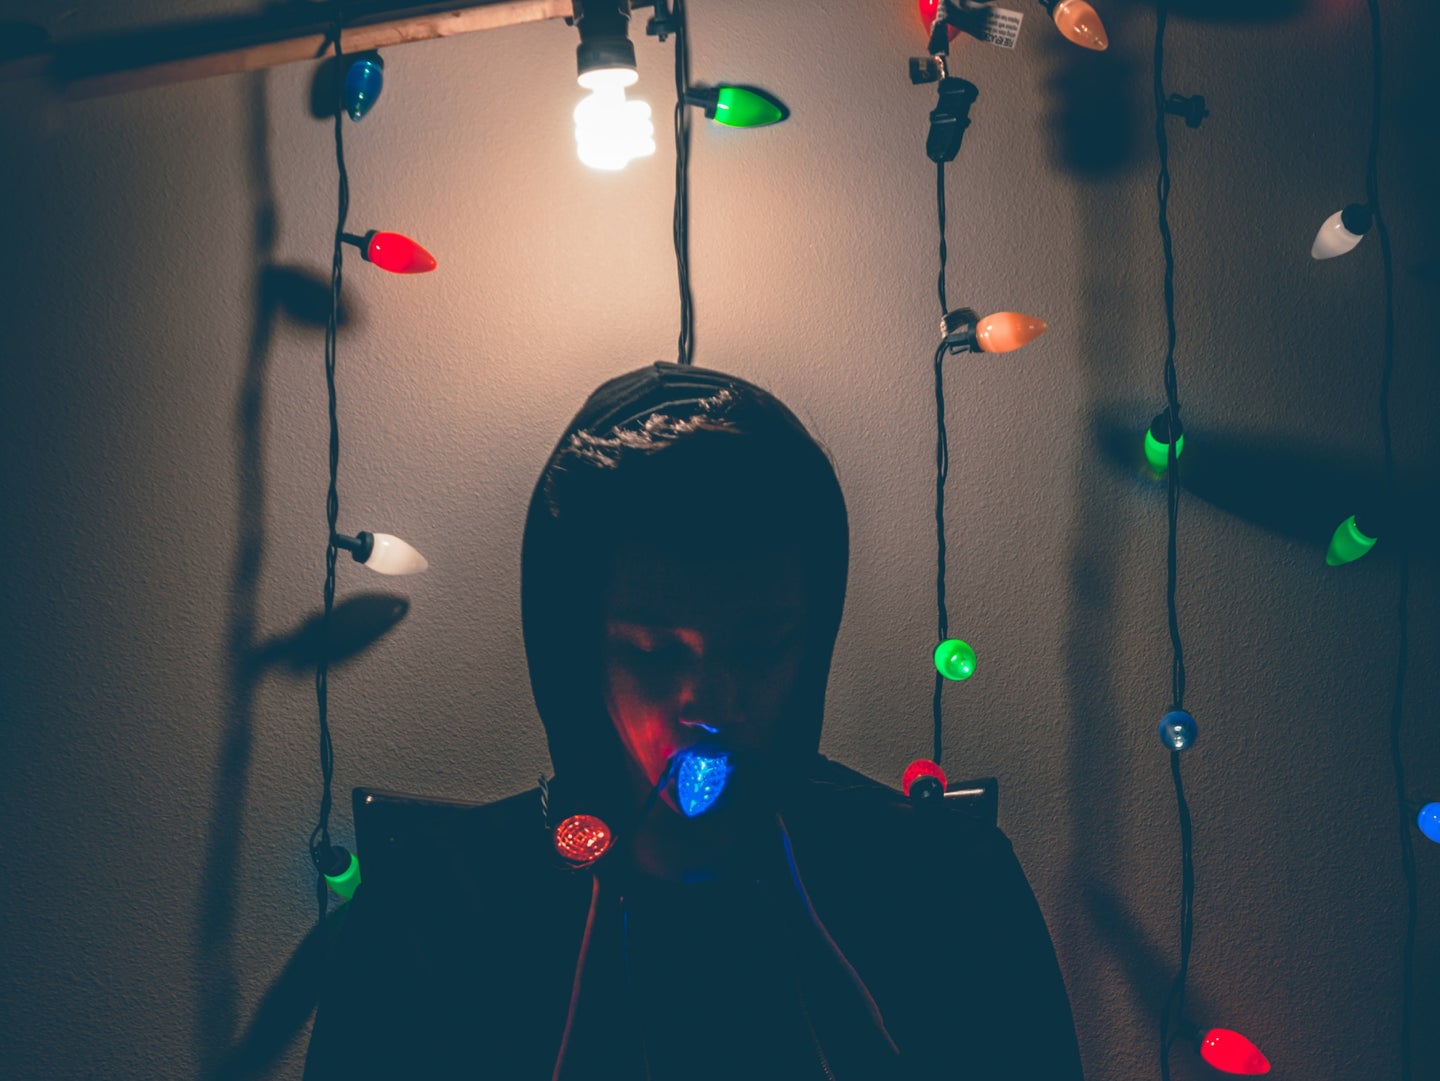 Person sitting under a light in a dark room to store holiday decorations, surrounded by Christmas lights